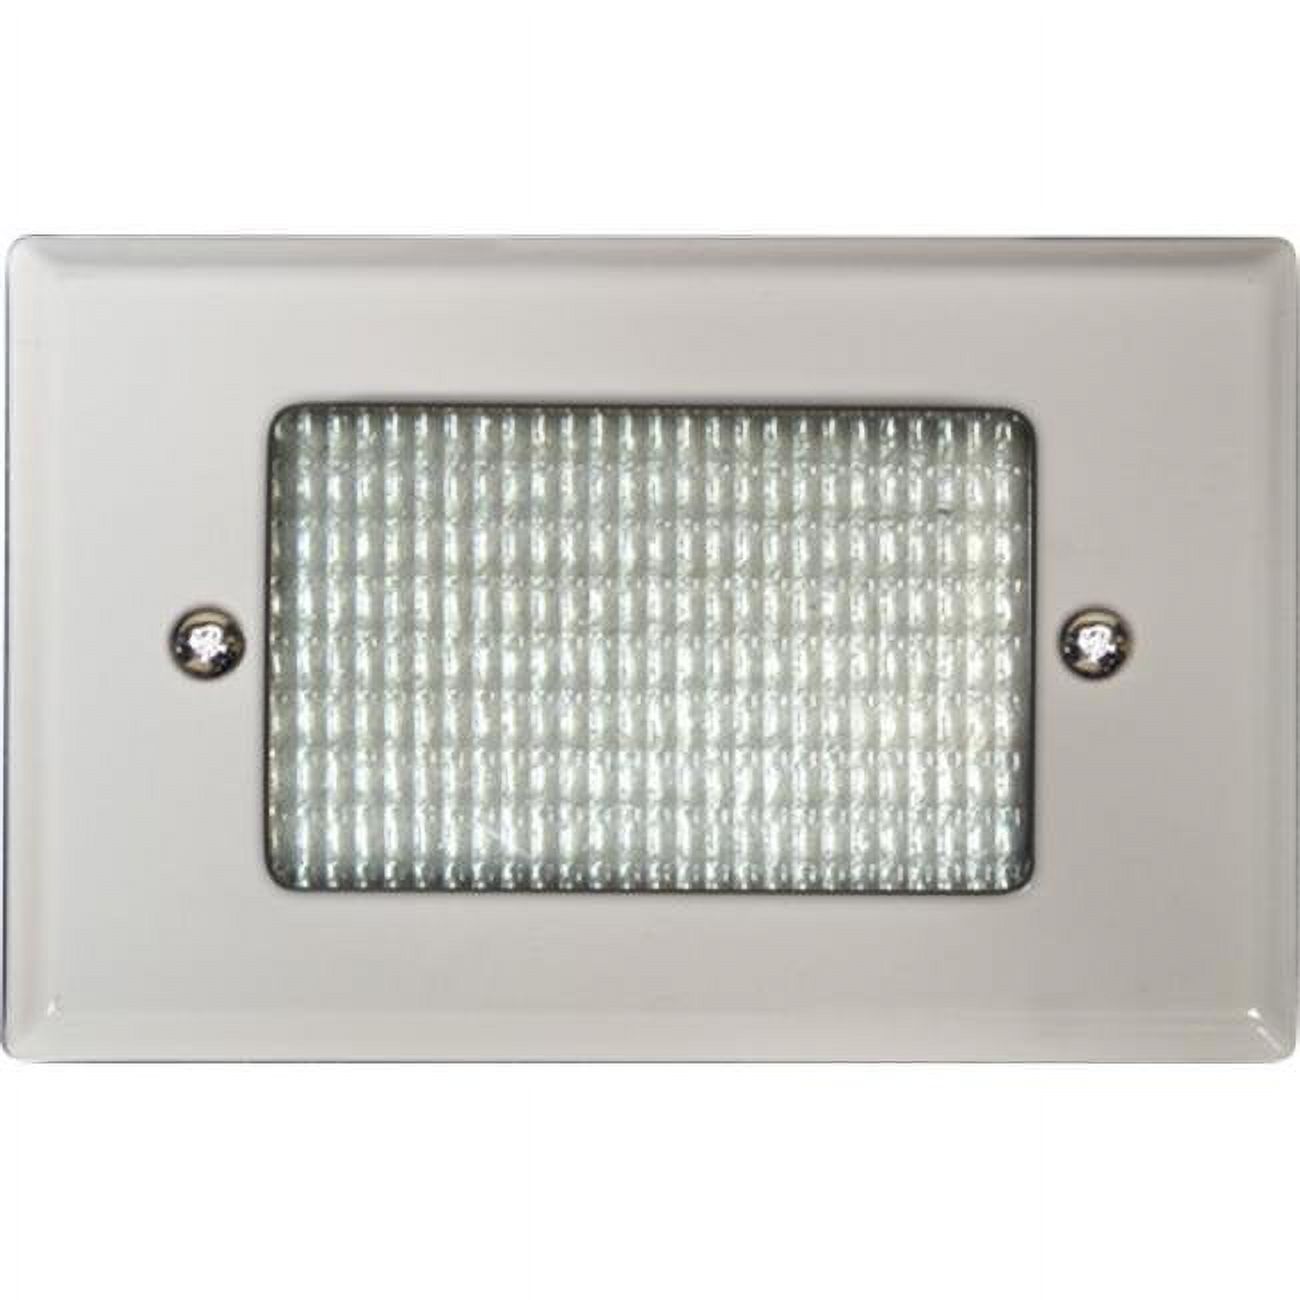 Dabmar Lighting LV618-W Cast Aluminum Recessed Open Face Brick, Step & Wall Light, White - 1.95 x 4.83 x 3.10 in. - image 1 of 1